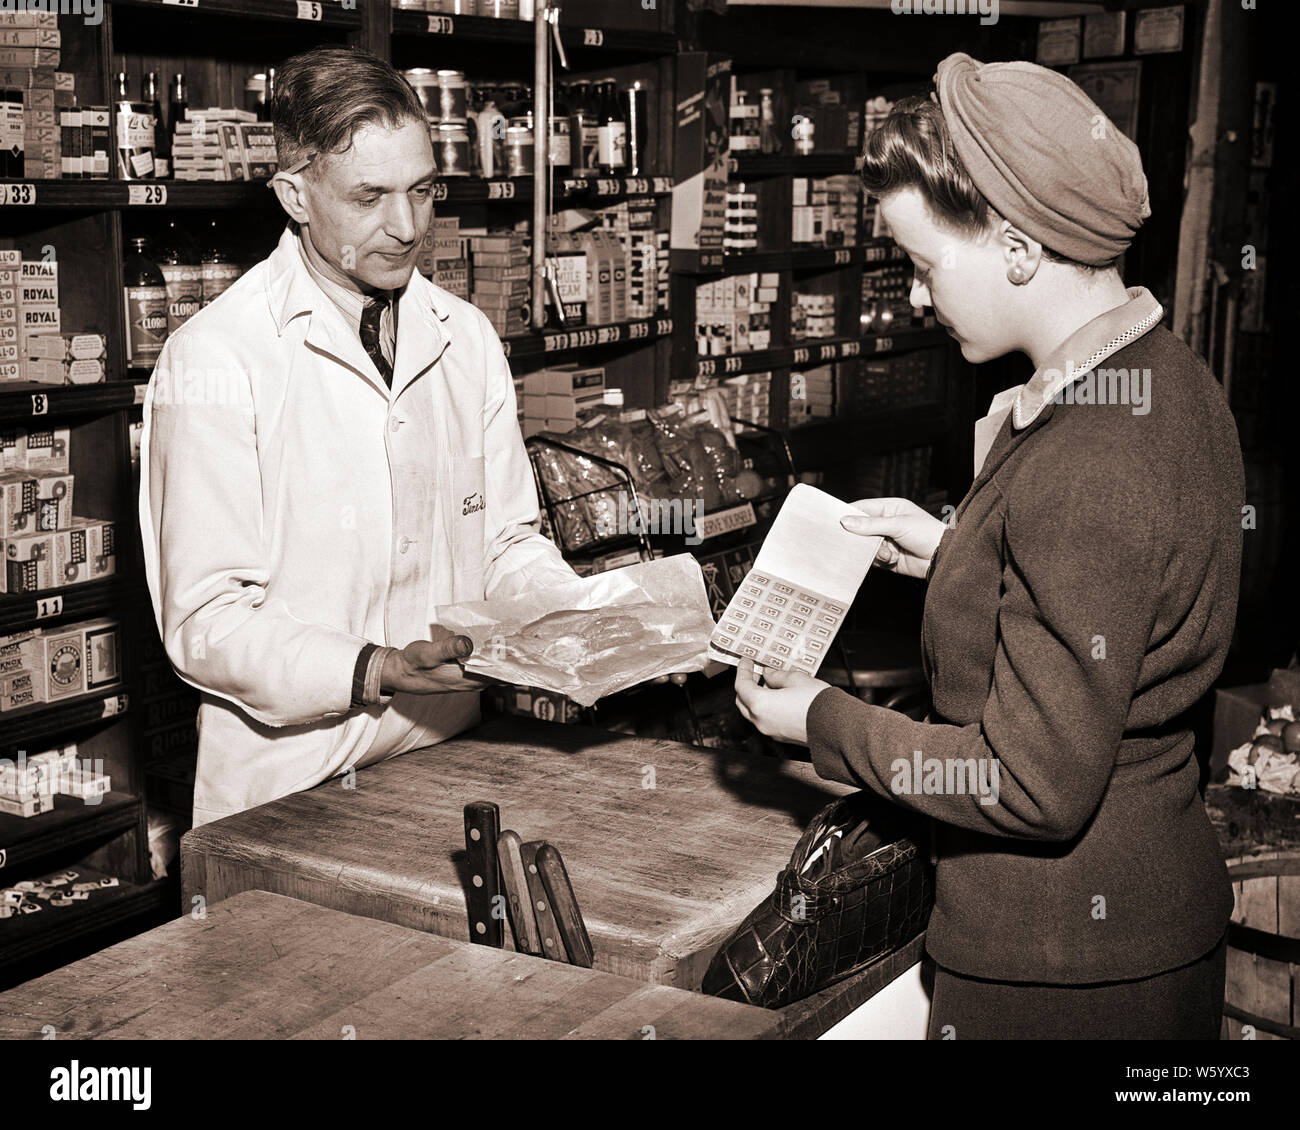 1940s WOMAN FOOD SHOPPER PURCHASING MEAT FROM BUTCHER WITH COUPON RATION STAMP BOOK IN GROCERY NEW YORK CITY USA  - q43052 CPC001 HARS MEAT BUTCHER B&W SERVICES SHOPPER SUCCESS GOODS CUSTOMER SERVICE CHOICE WORLD WARS WORLD WAR WORLD WAR TWO WORLD WAR II IN OCCUPATIONS CONCEPTUAL RATION RATIONING STYLISH SUPPORT WORLD WAR 2 NEW YORK CITY COUPON PURCHASING DEMAND MID-ADULT MID-ADULT MAN YOUNG ADULT WOMAN BLACK AND WHITE CAUCASIAN ETHNICITY OLD FASHIONED Stock Photo